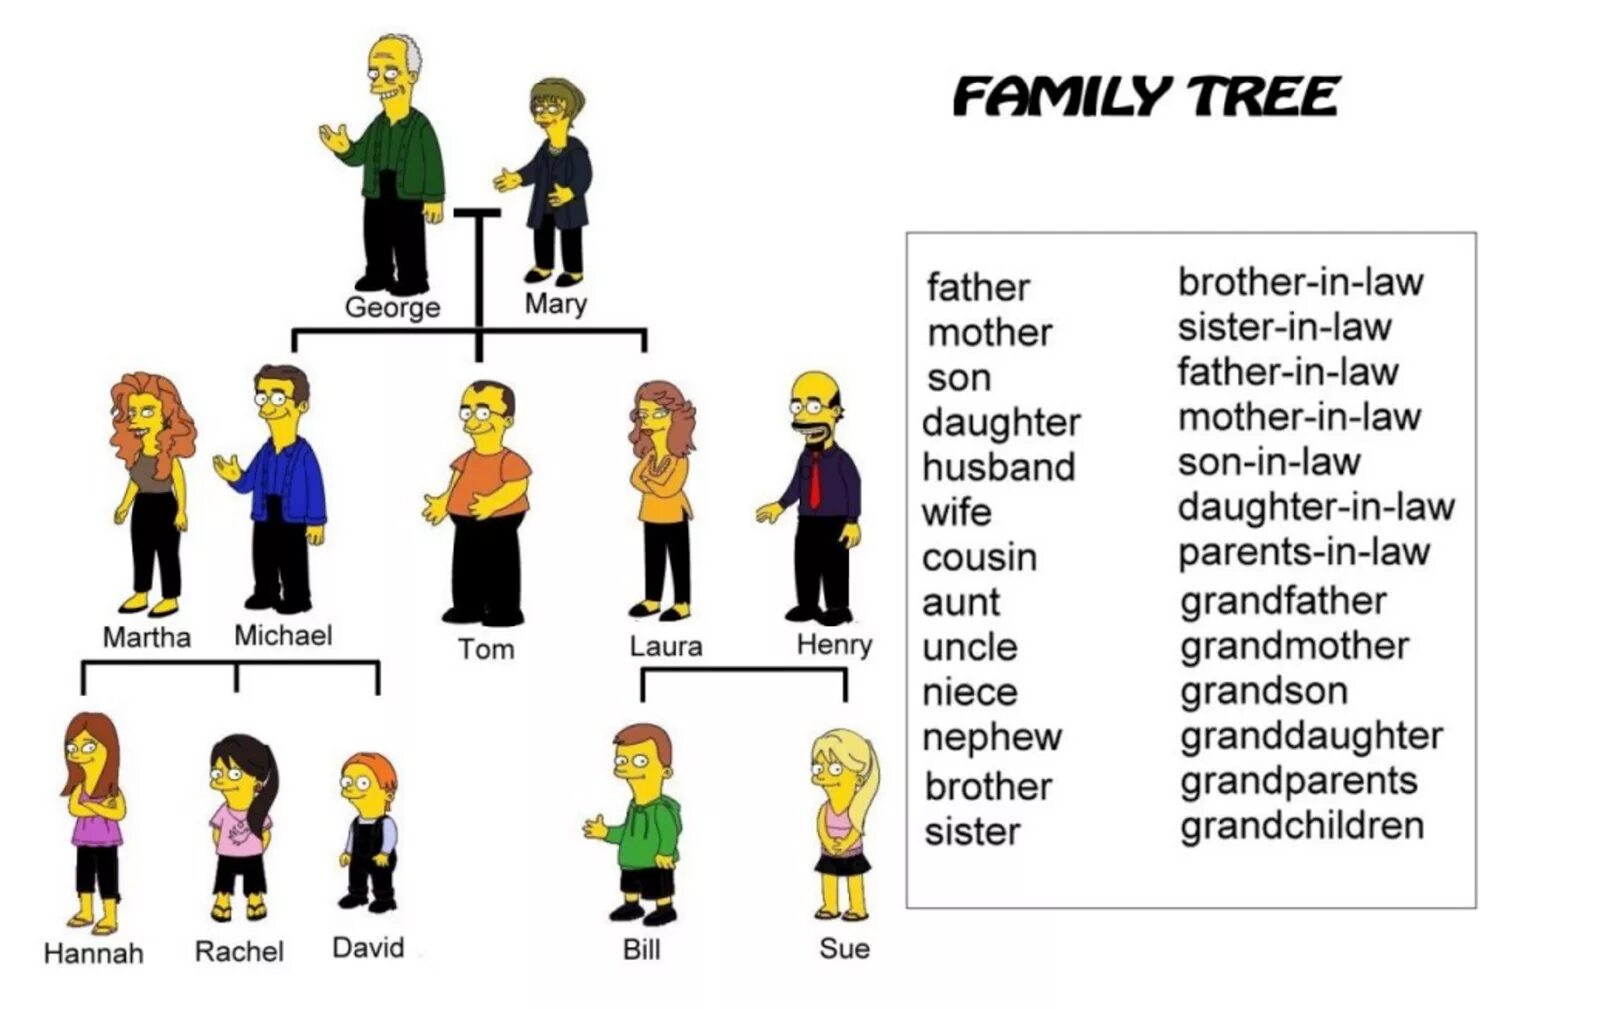 Sister по английски. Family members Family Tree. Семья на английском языке. Names of Family members in English.